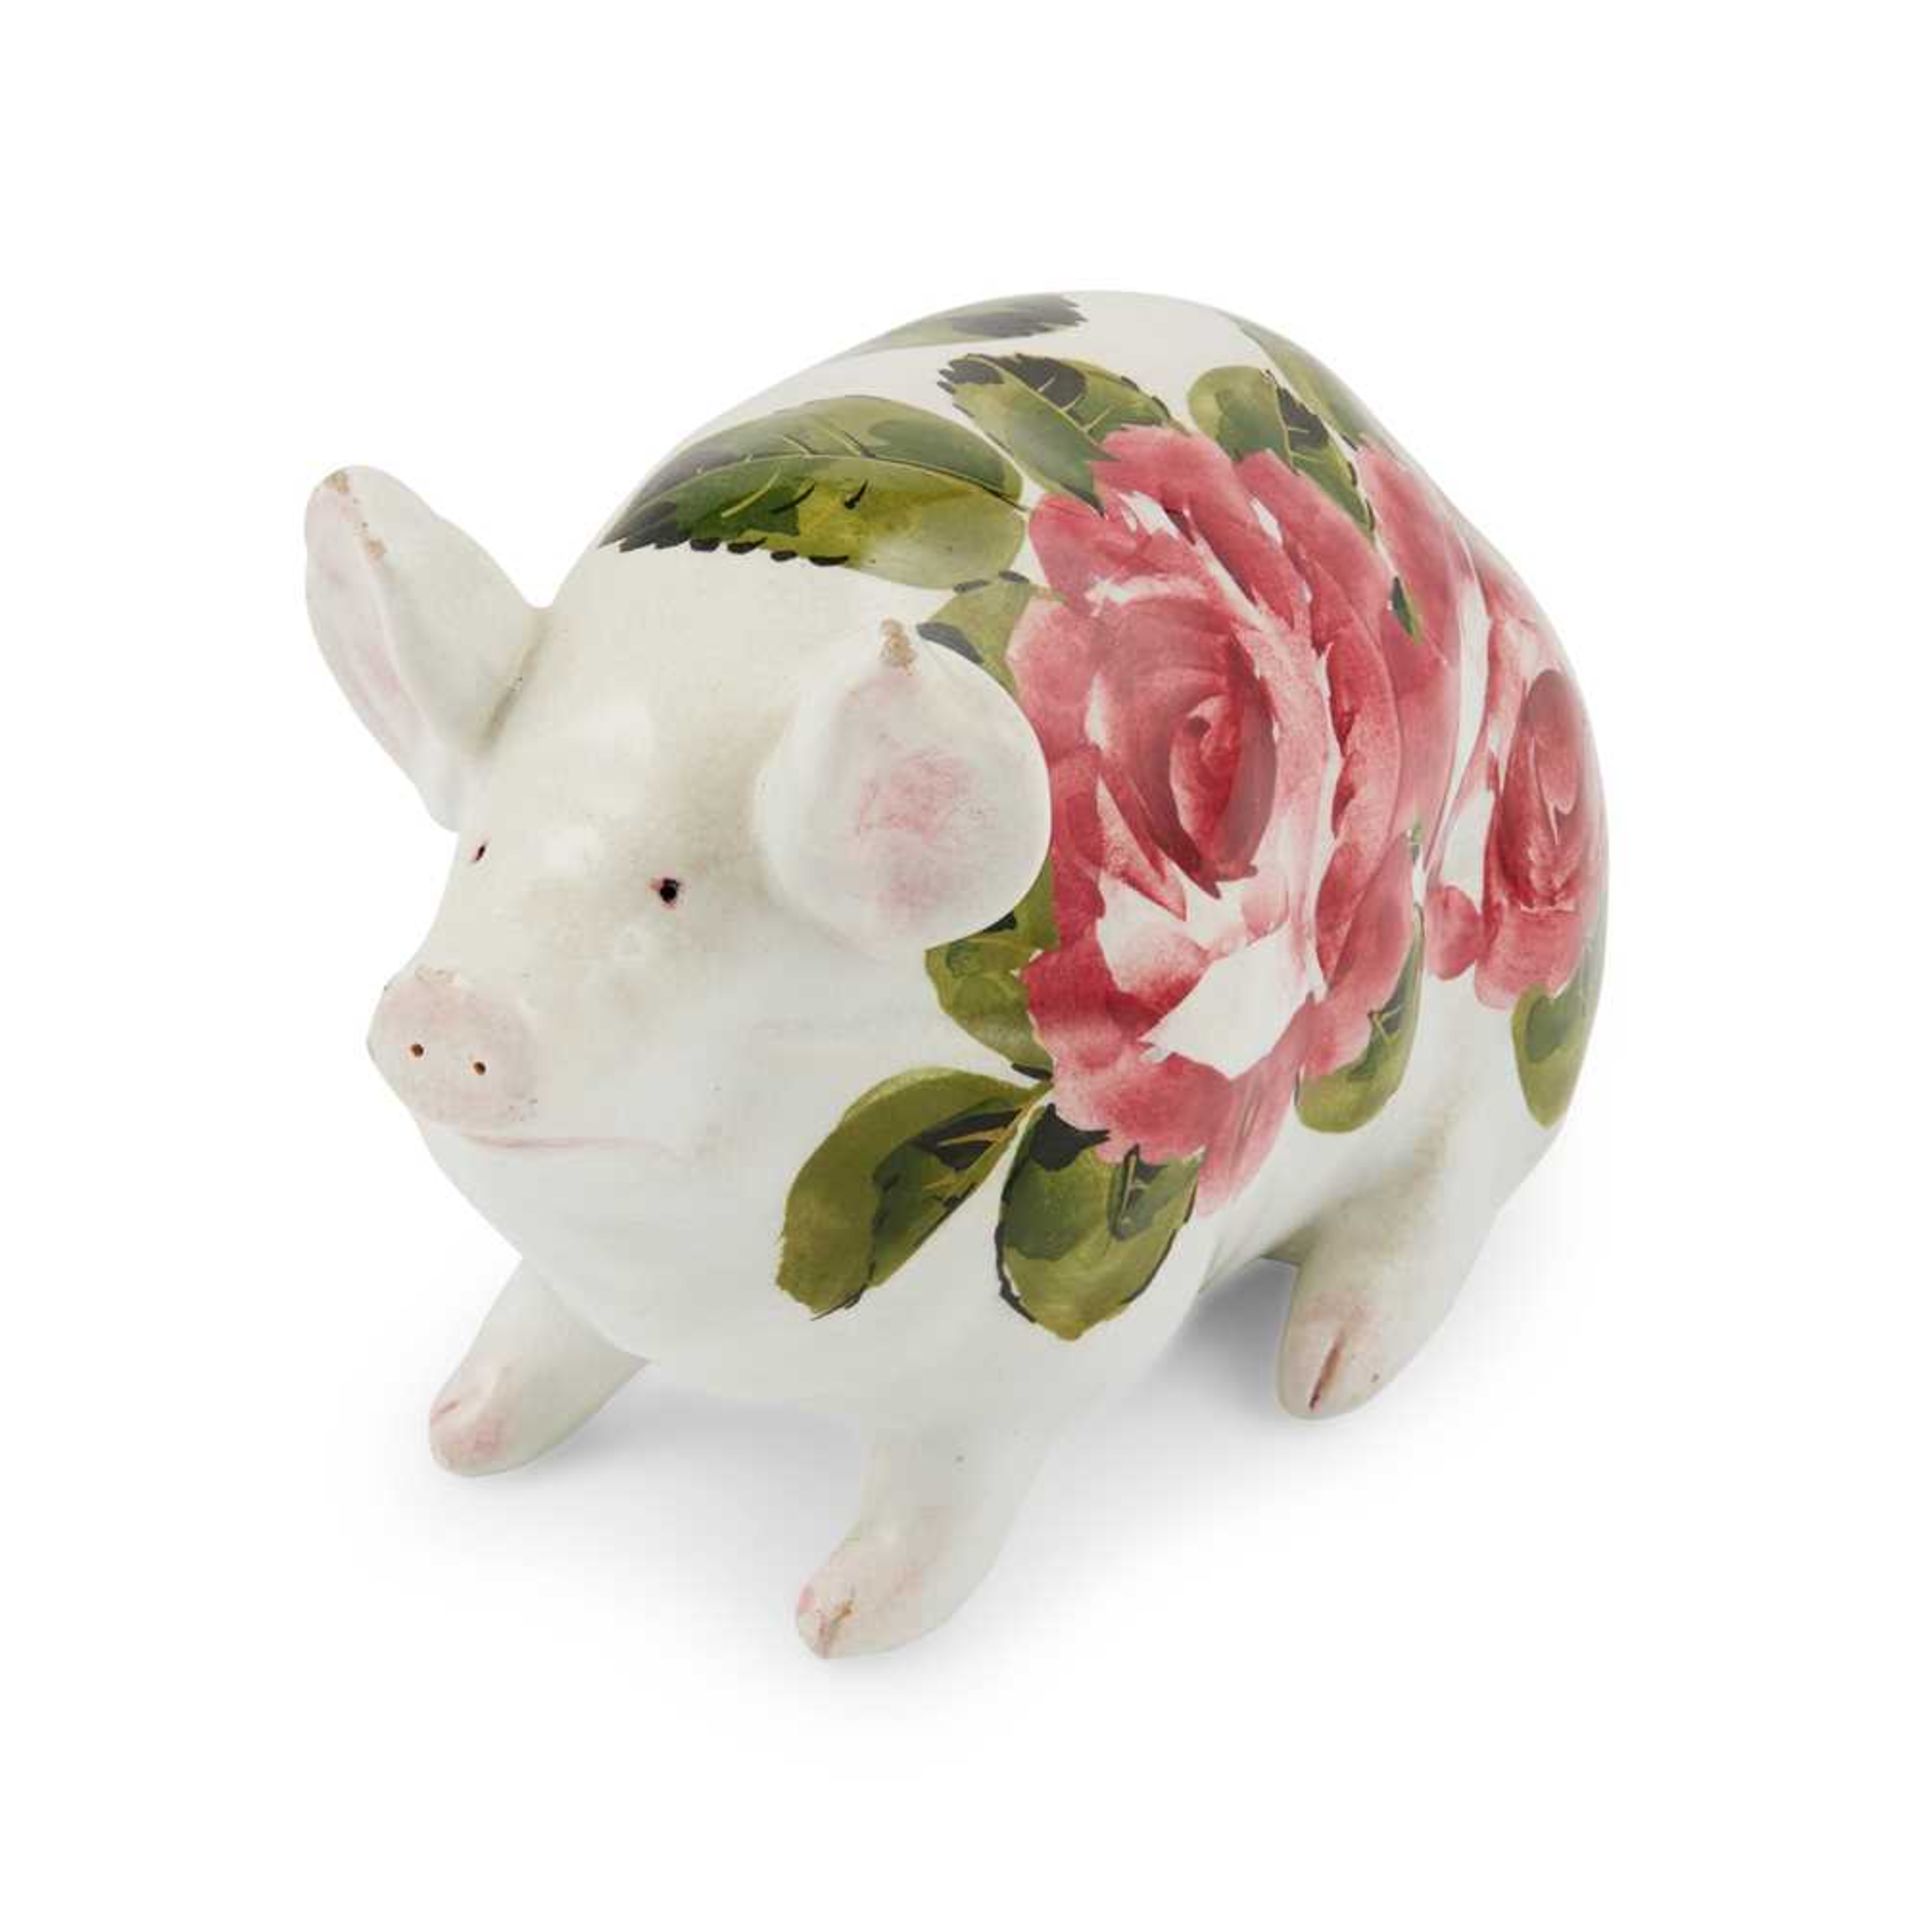 A SMALL WEMYSS WARE PIG 'CABBAGE ROSES' PATTERN, EARLY 20TH CENTURY - Image 2 of 2